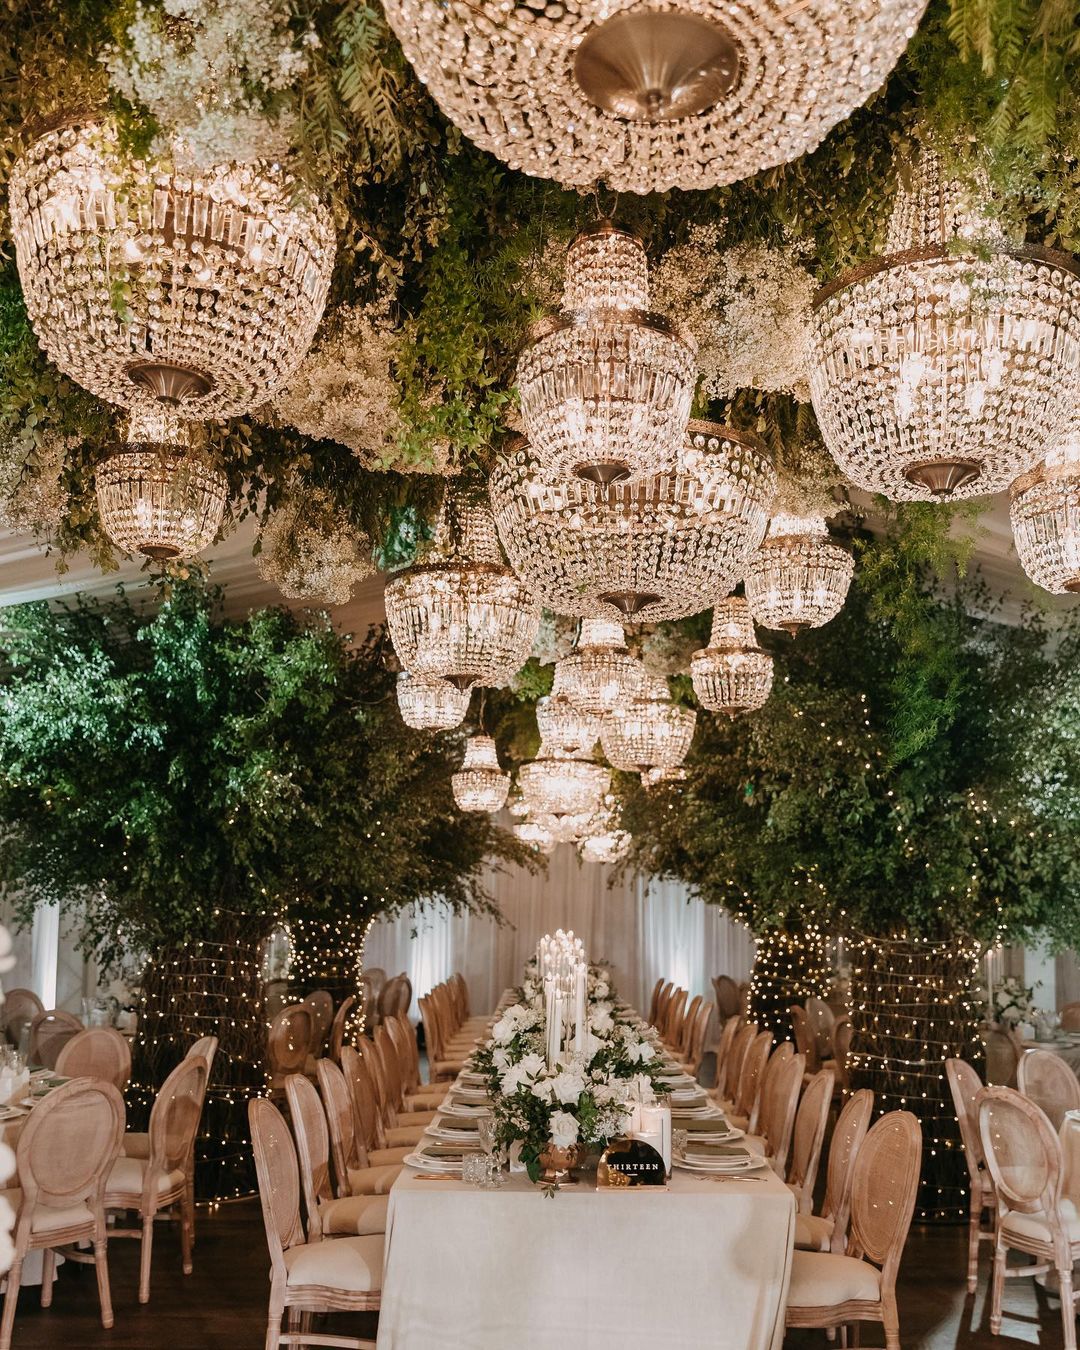 Wedding reception from fairytales by Diane Khoury.